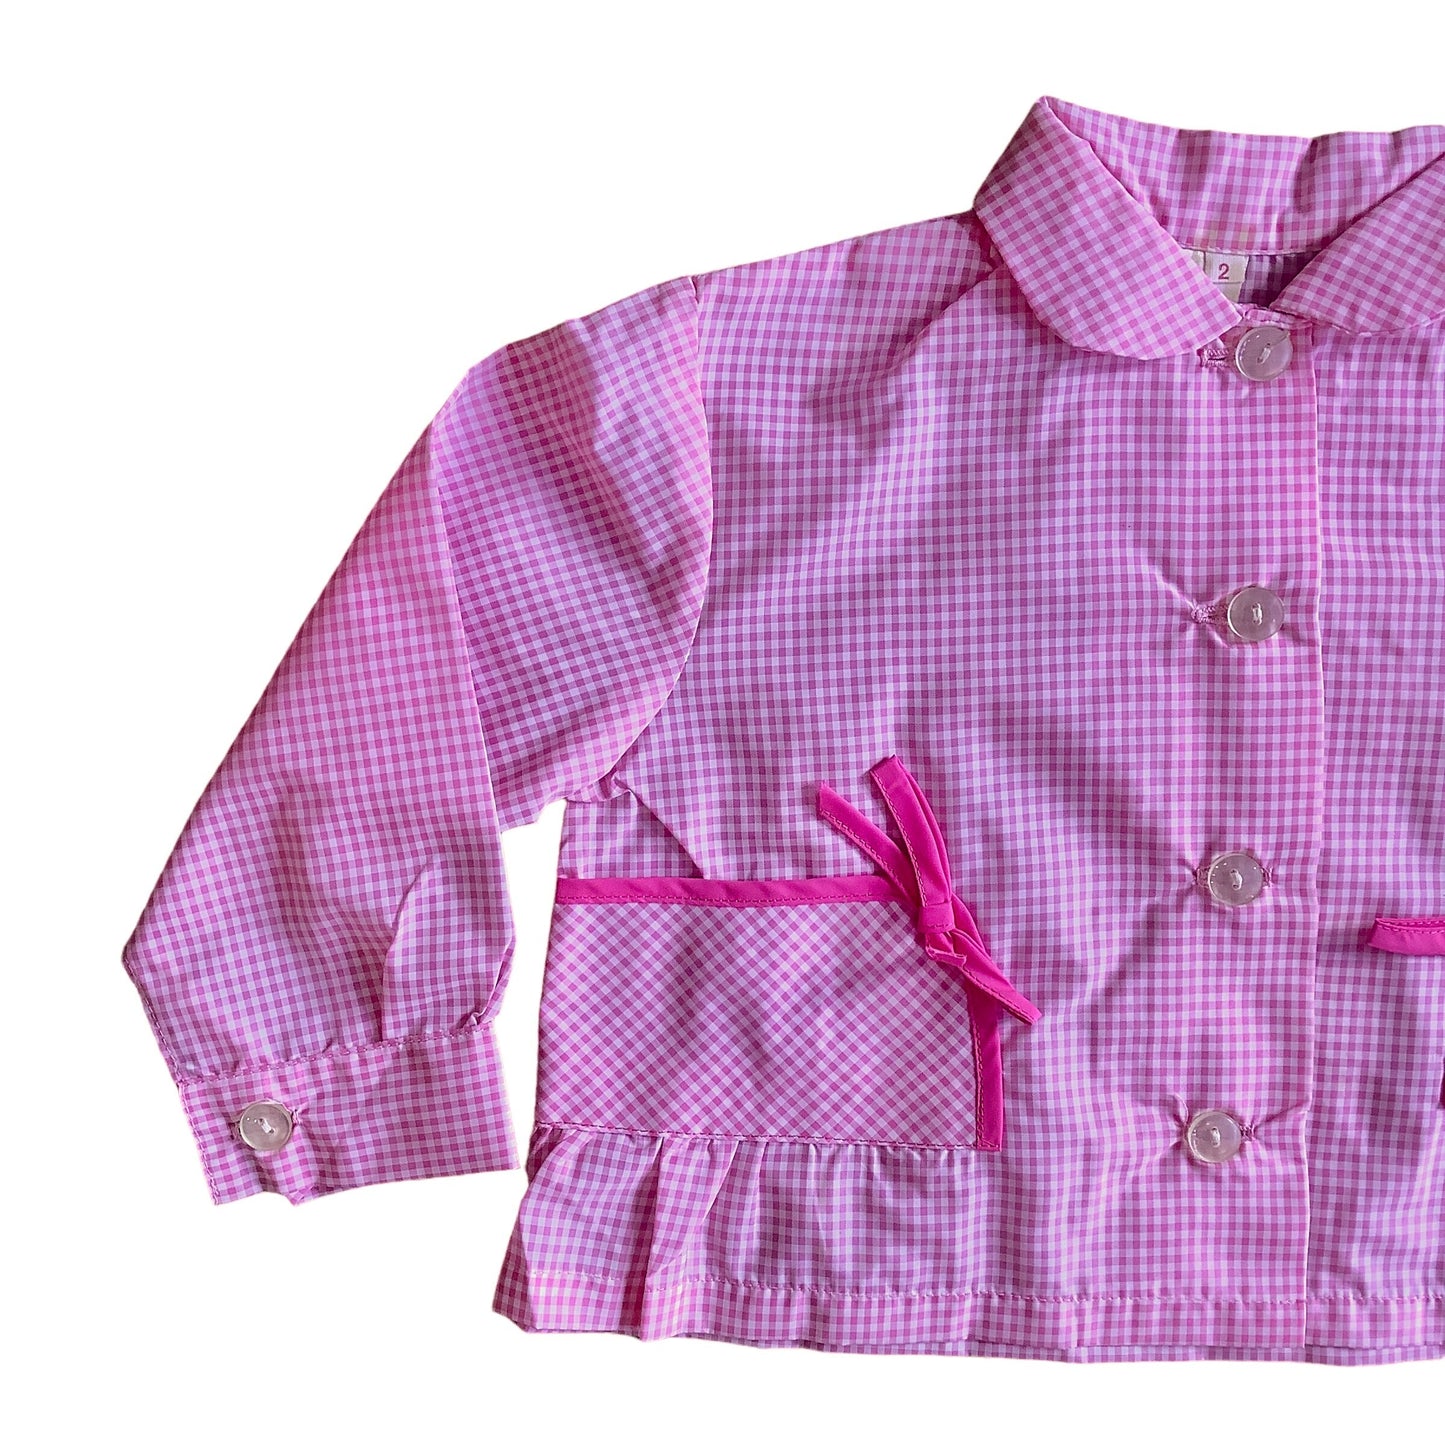 1960s Pink Gingham Baby / Toddler Apron / Blouse 3-4Y